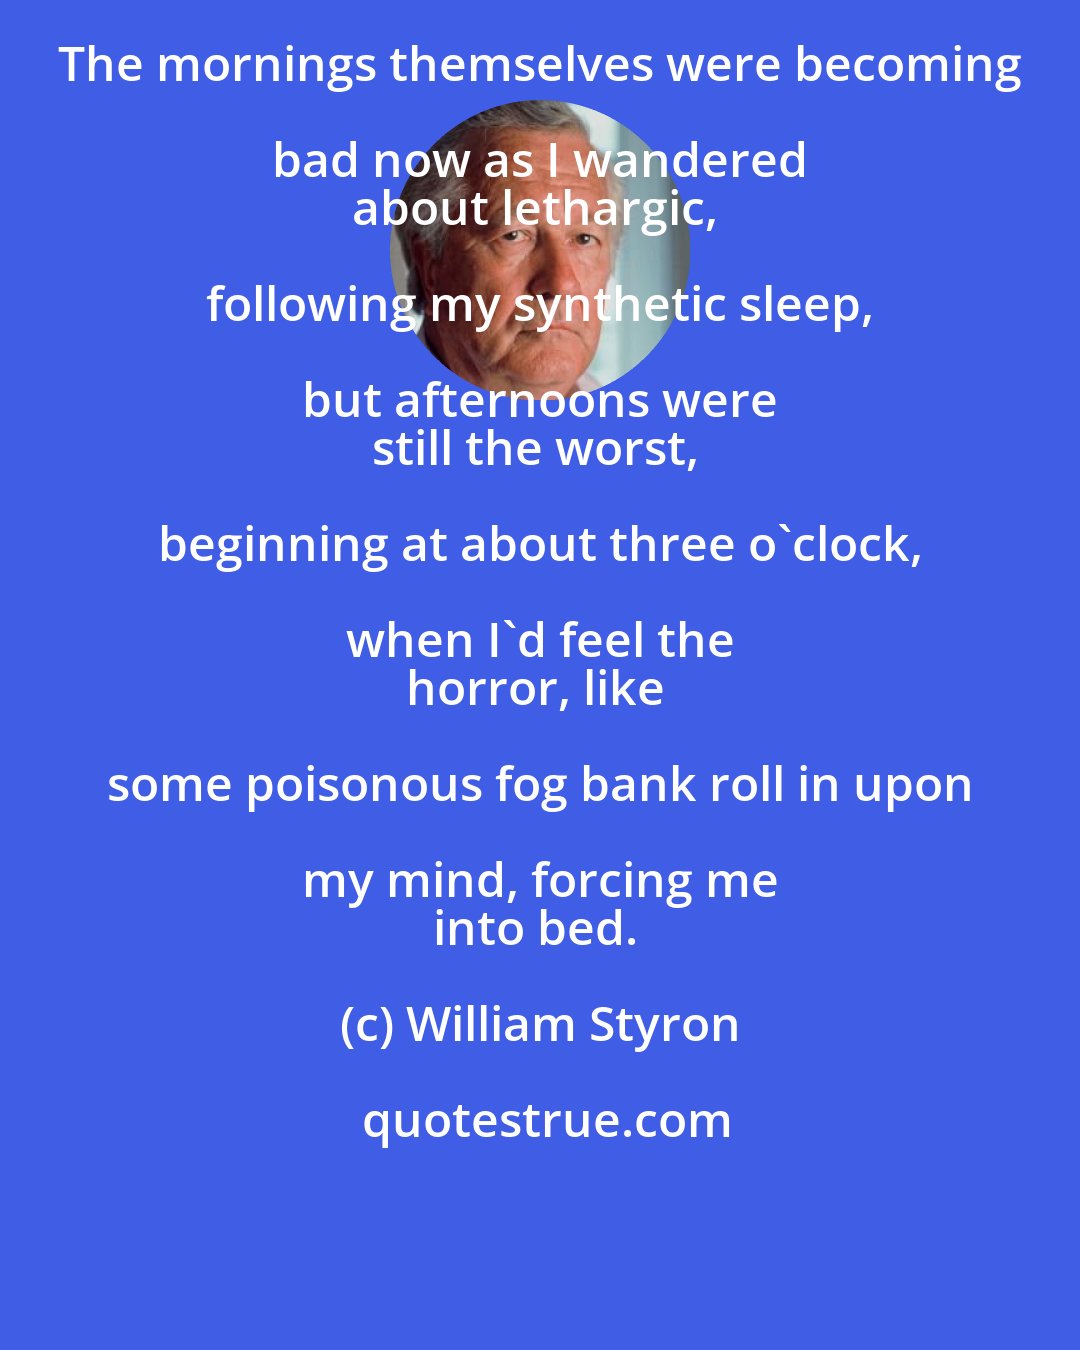 William Styron: The mornings themselves were becoming bad now as I wandered 
about lethargic, following my synthetic sleep, but afternoons were 
still the worst, beginning at about three o'clock, when I'd feel the 
horror, like some poisonous fog bank roll in upon my mind, forcing me 
into bed.